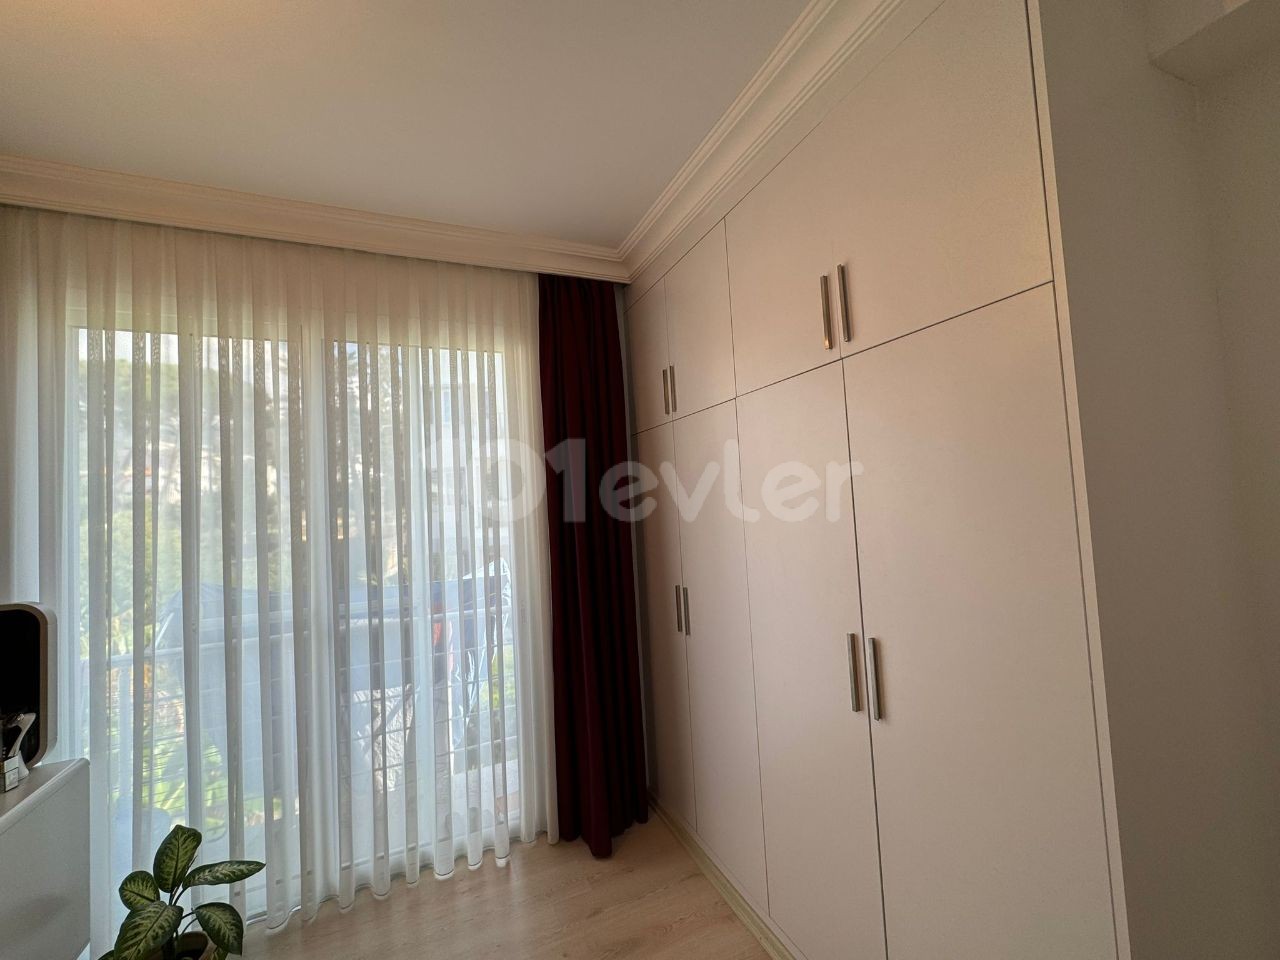 ***FULLY FURNISHED 3 BEDROOM FLAT FOR SALE IN ALSANCAK WITH POOL, WALKING DISTANCE TO THE BEACH, MARKETS AND SCHOOLS***